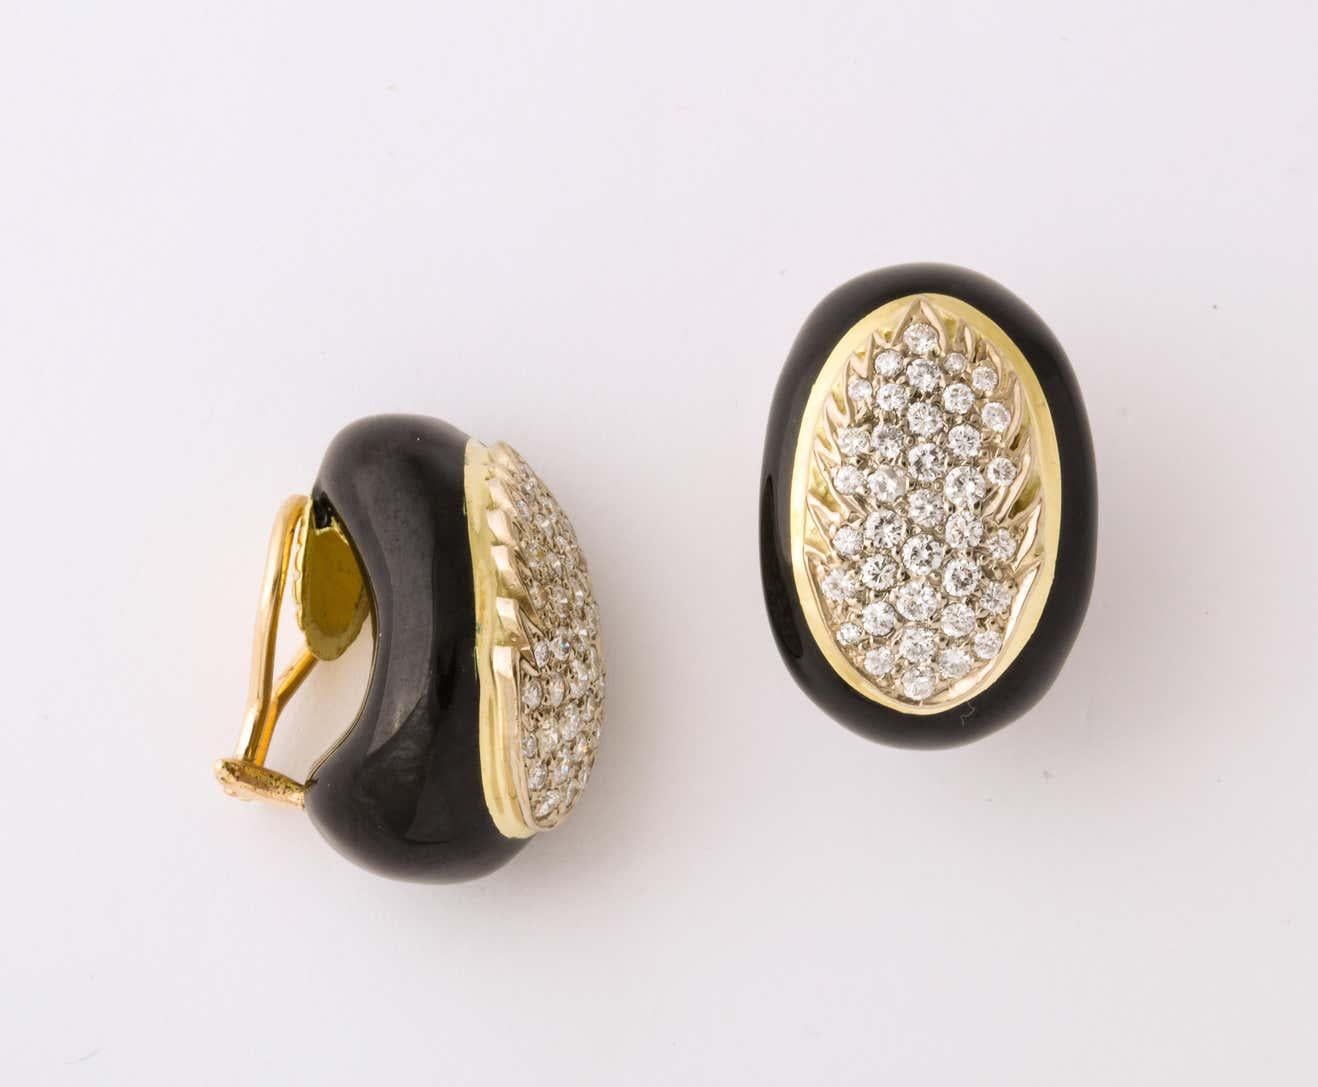 One Ladies Pair Of High Polish Black Enamel Earrings Embellished With Aproximatley 4 Carats Of Full Cut diamonds. Diamonds Beautifully Set In A 18kt Gold Flame Outline. Crated In The 1970's In The United States Of America.
